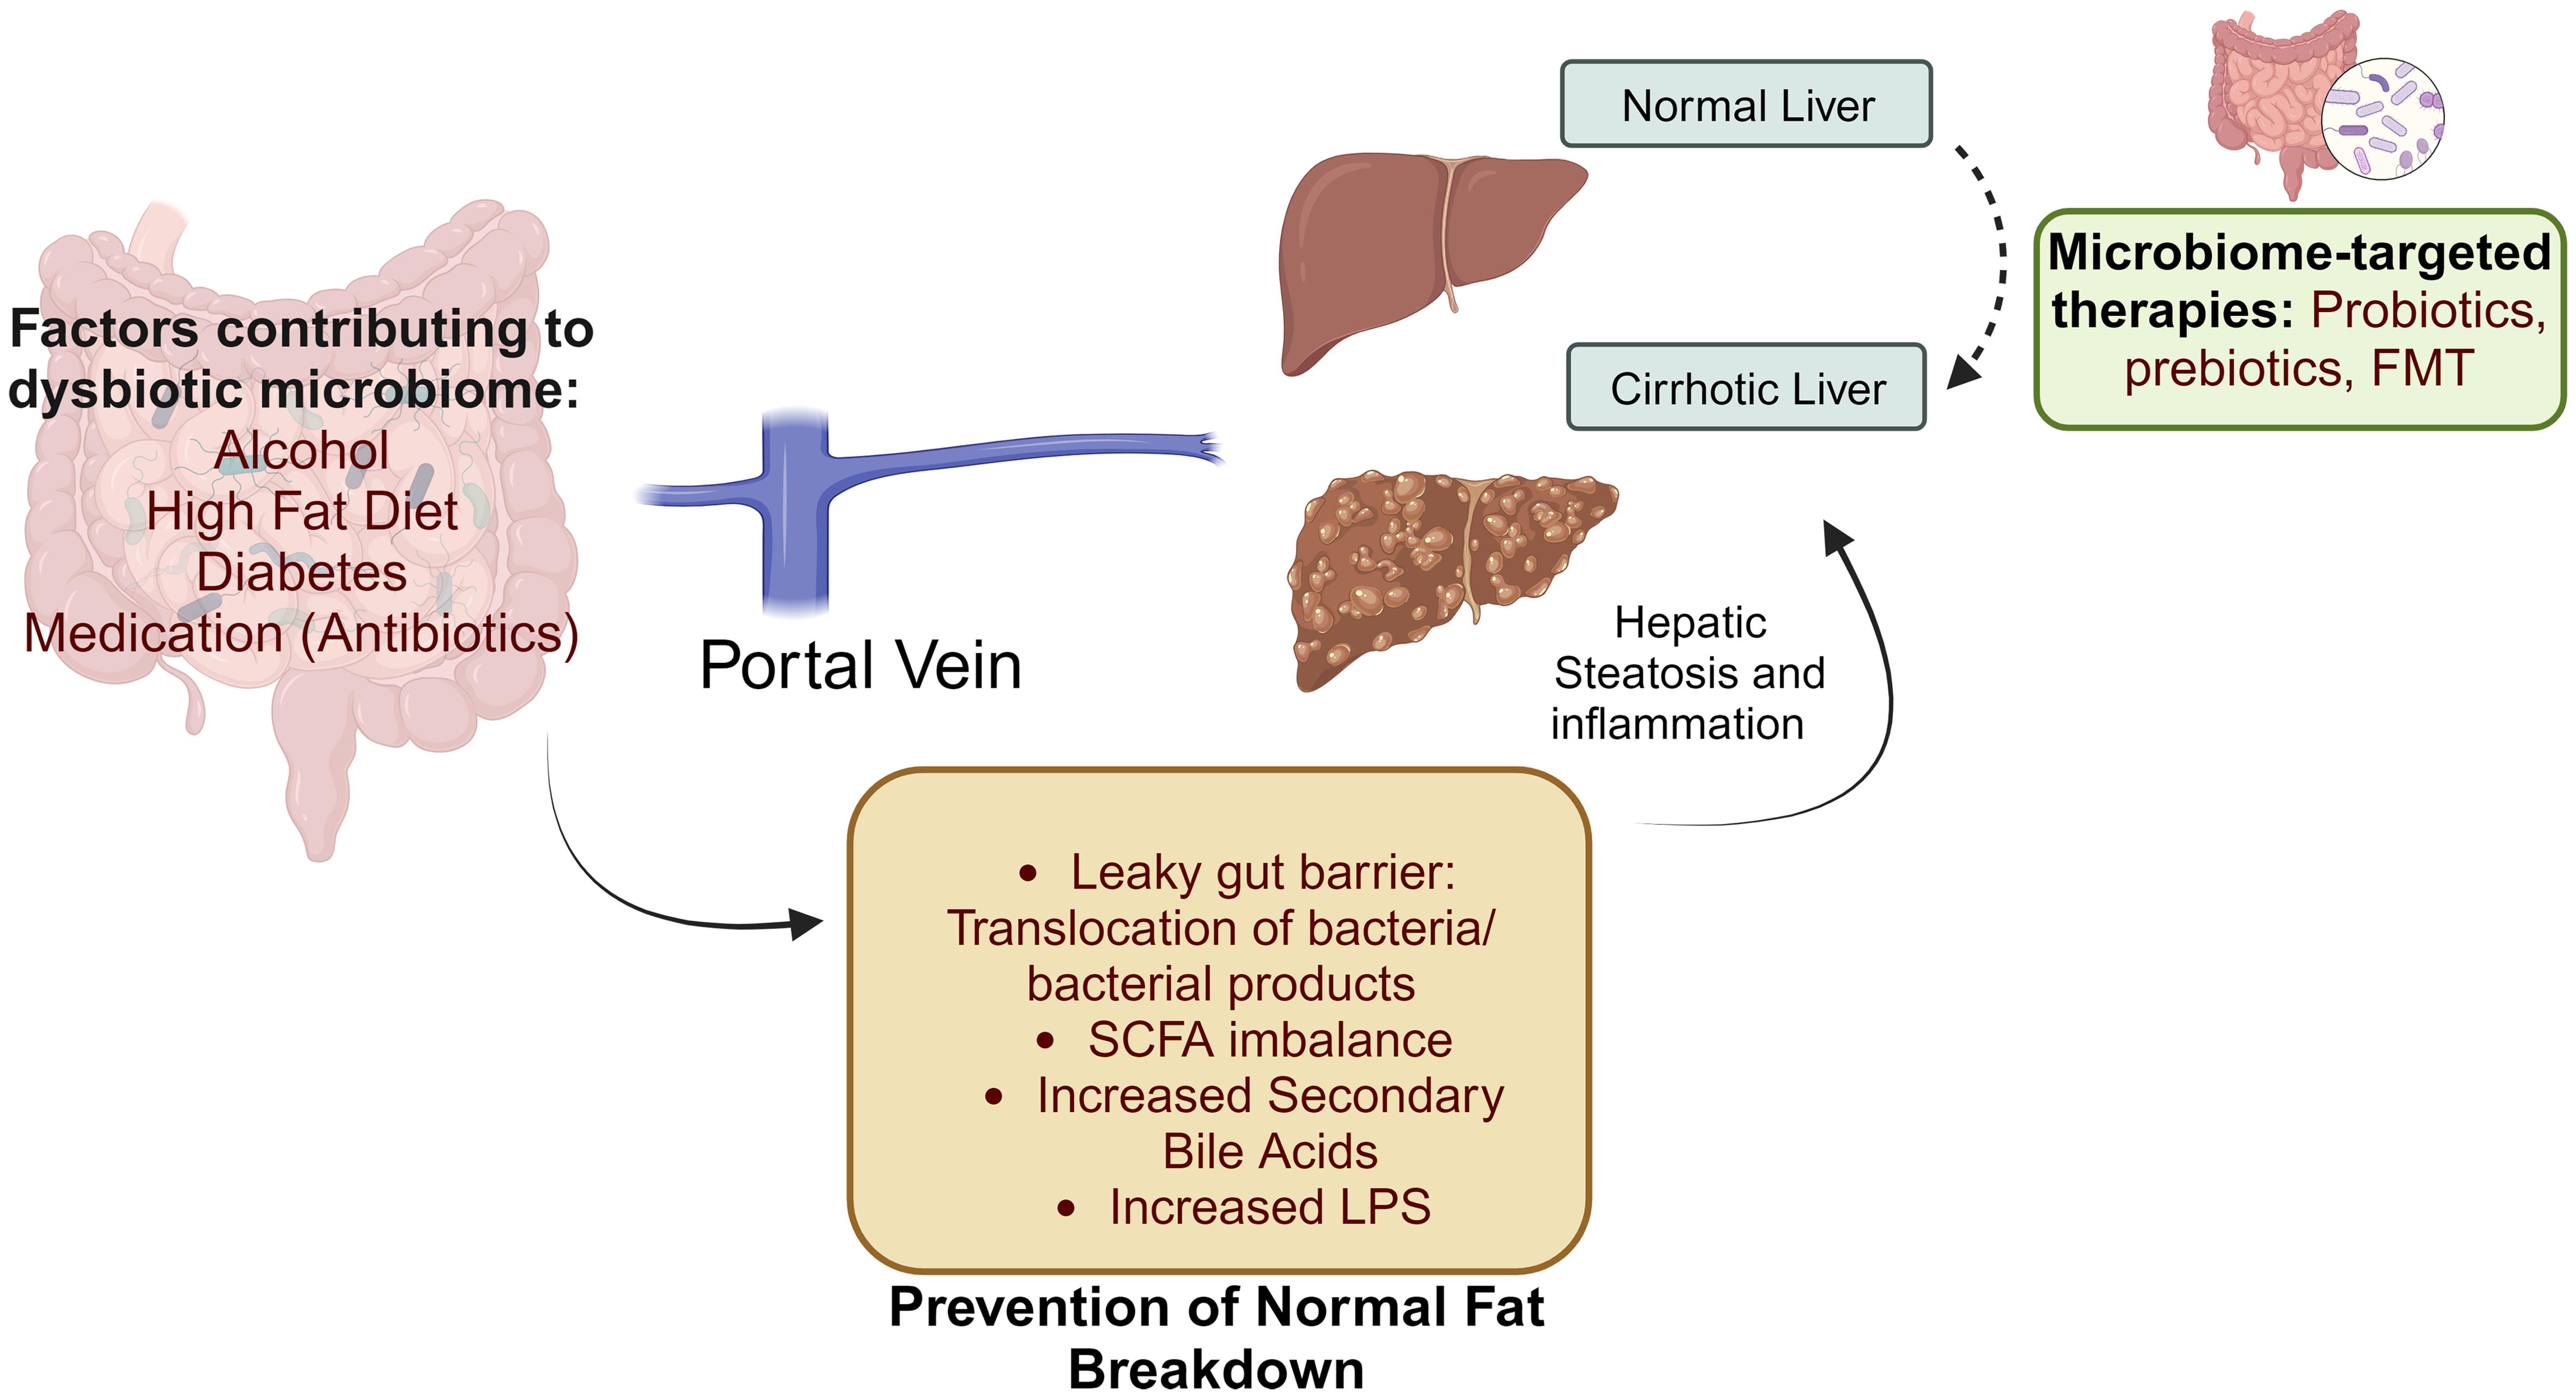 Liv 52 : reviews, dosage, benefits in fatty liver, liver care in